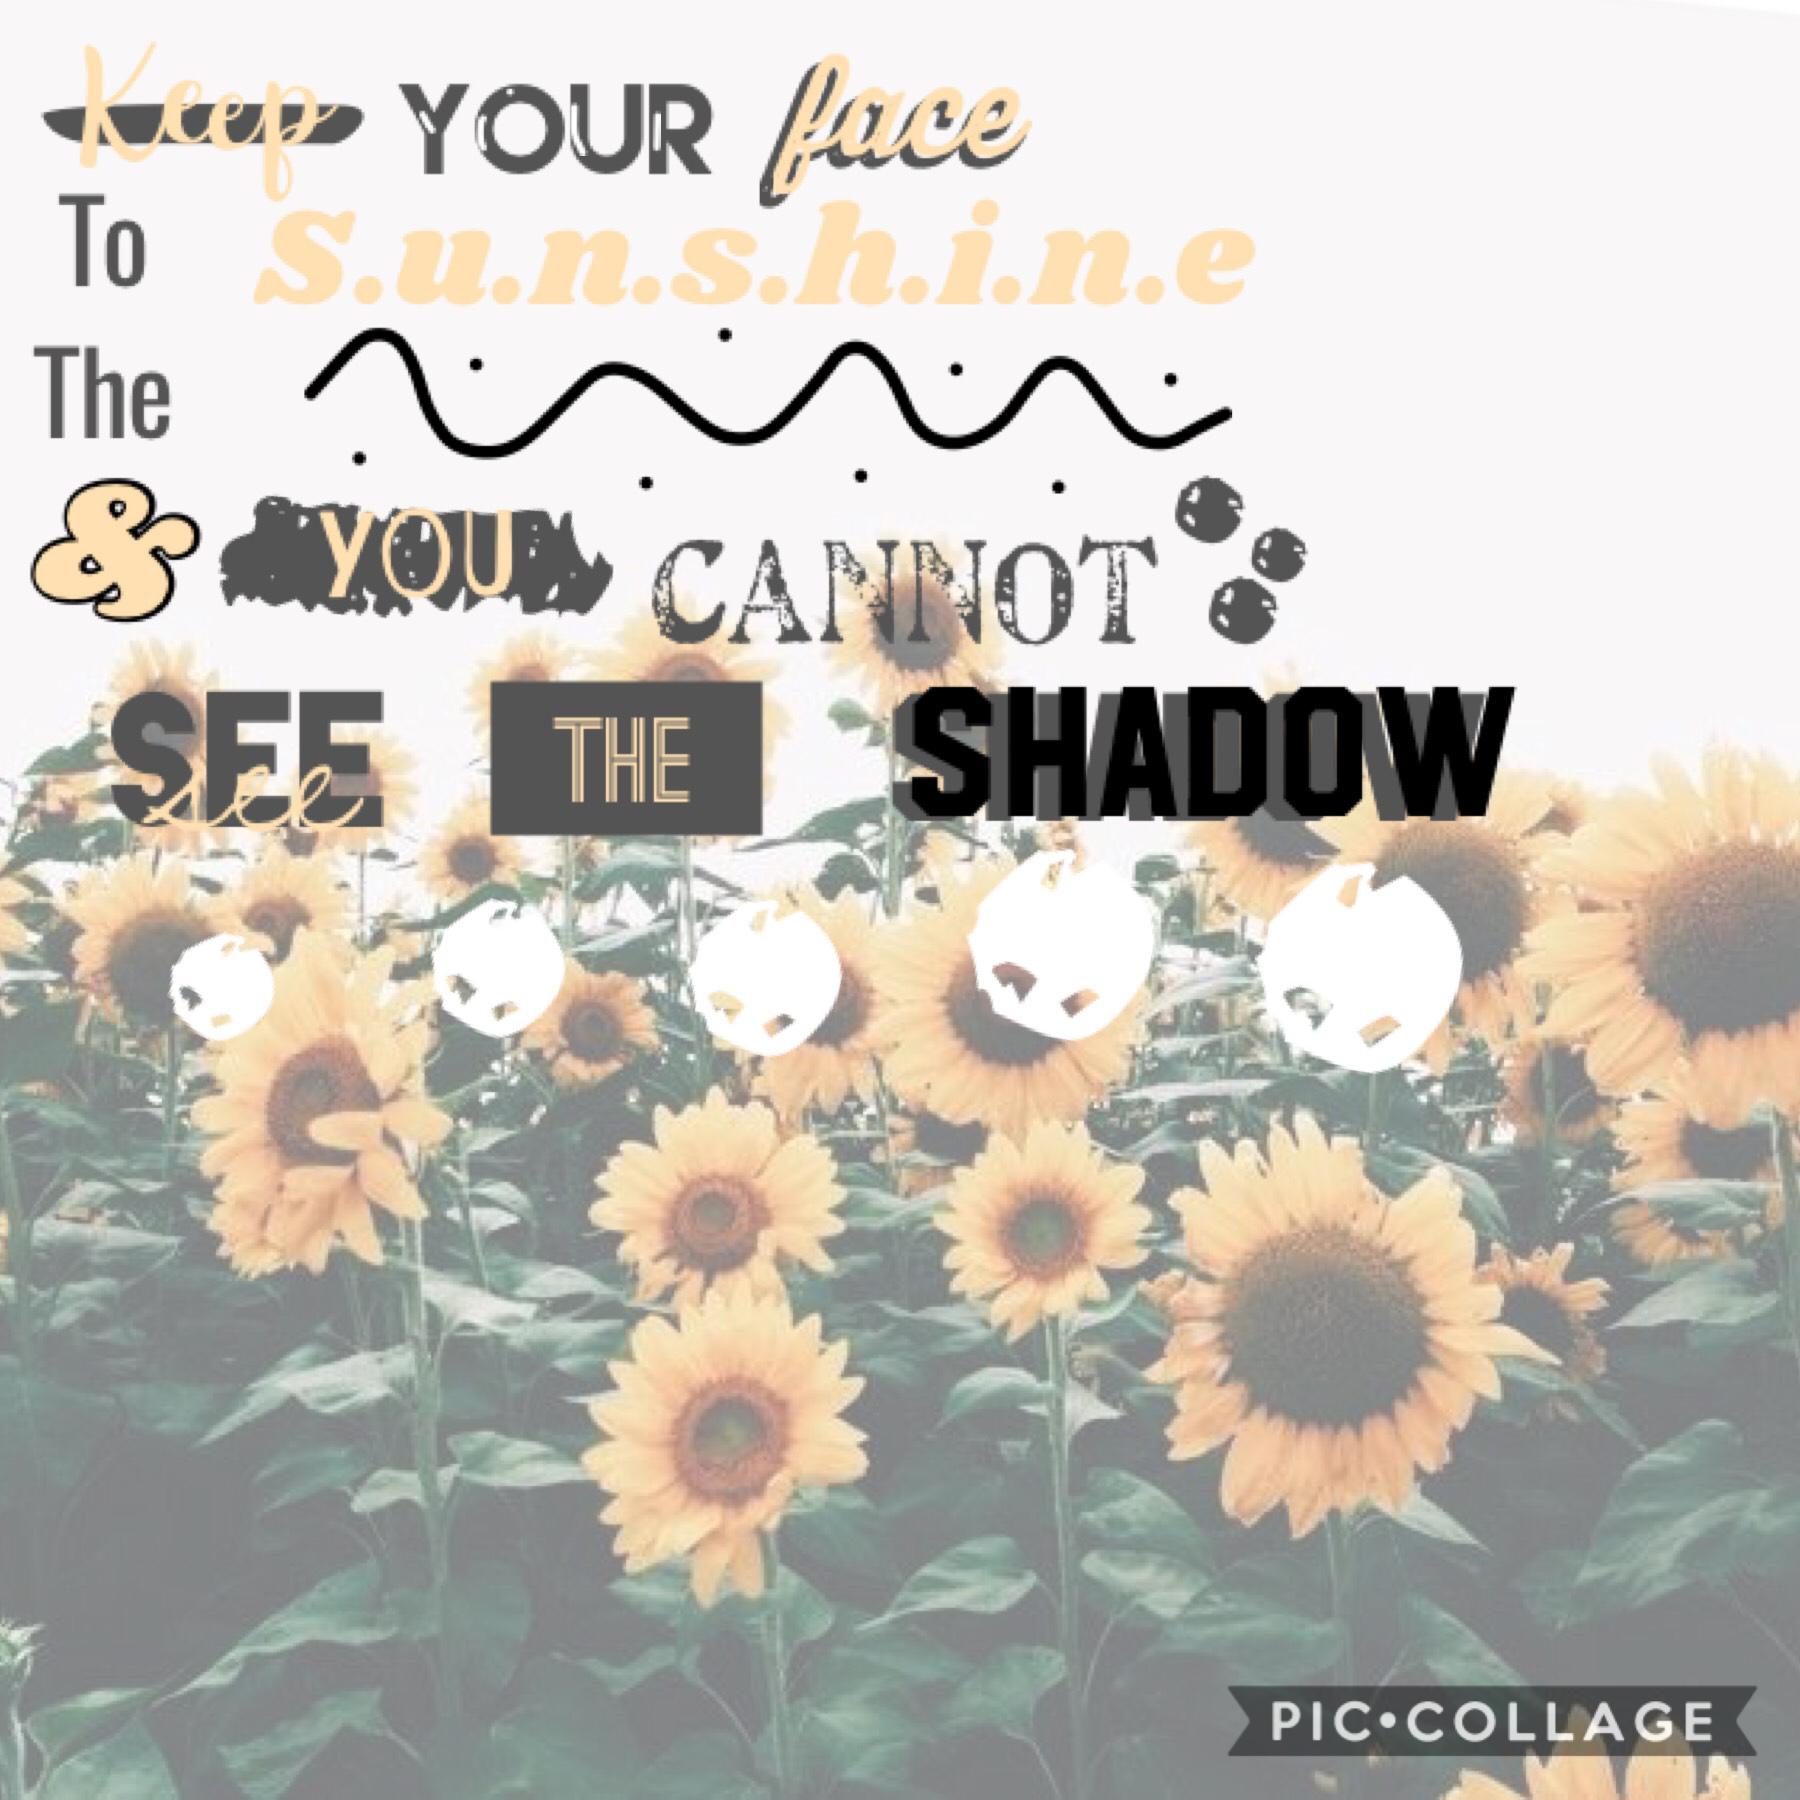 🌻Tap🌻

Ok lovelies, if you’ve been wondering why I haven’t been posting, it’s because I do most of my work in the car. Being summer and all, I have to stay home a lot to watch my brothers, therefore, I am not in the car. So, once school starts up again, I